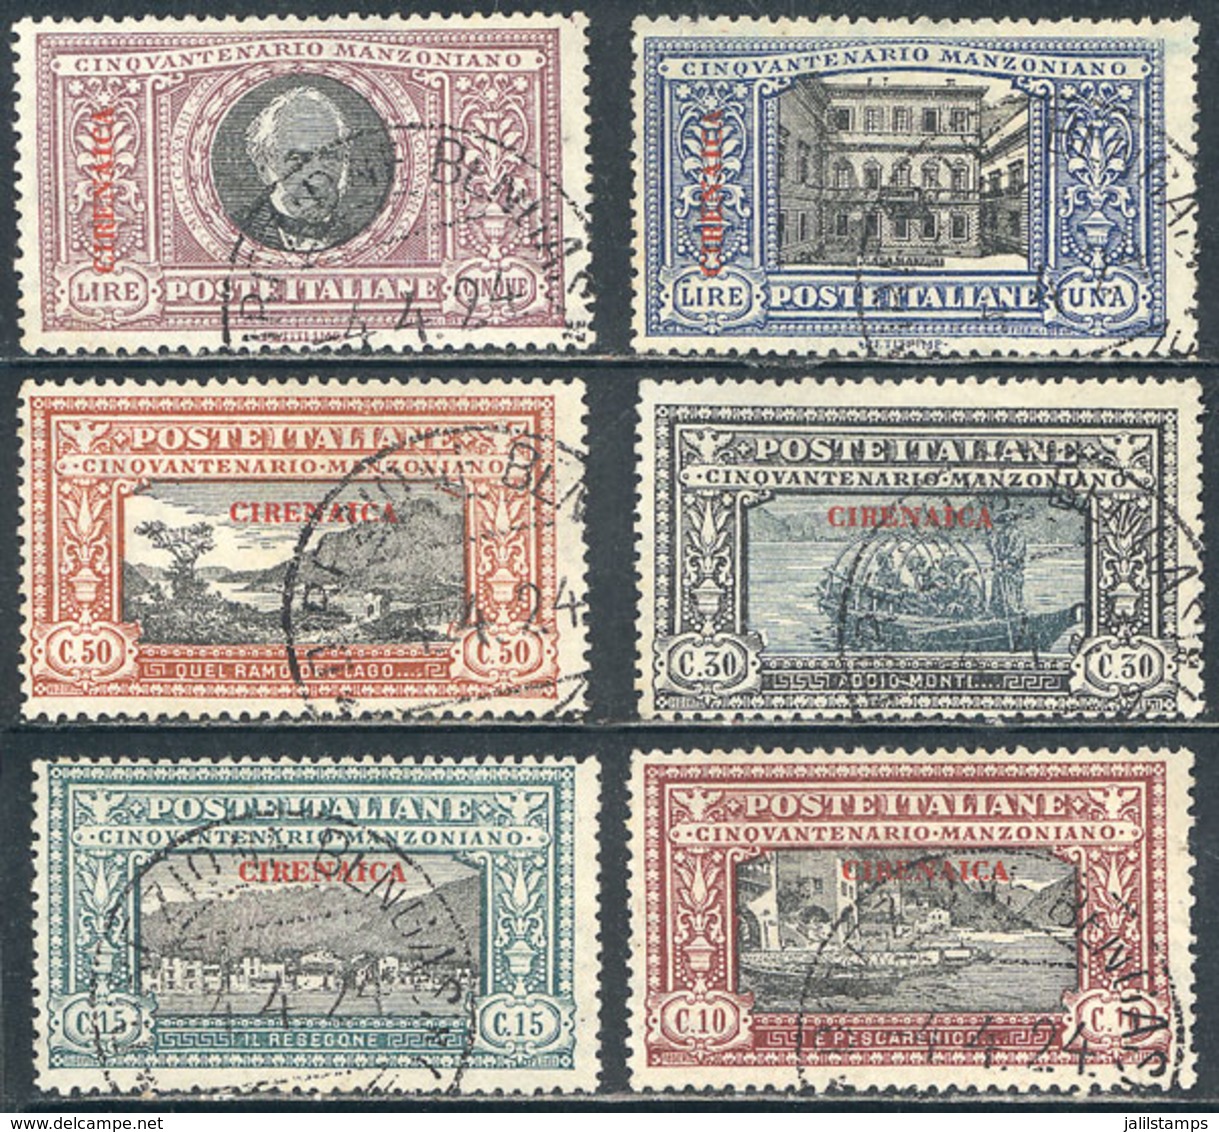 CYRENAICA: Sc.11/16, 1924 Manzoni, Cpl. Set Of 6 Used Values, Excellent Quality. Probably Cancelled To Order, Out O - Cirenaica